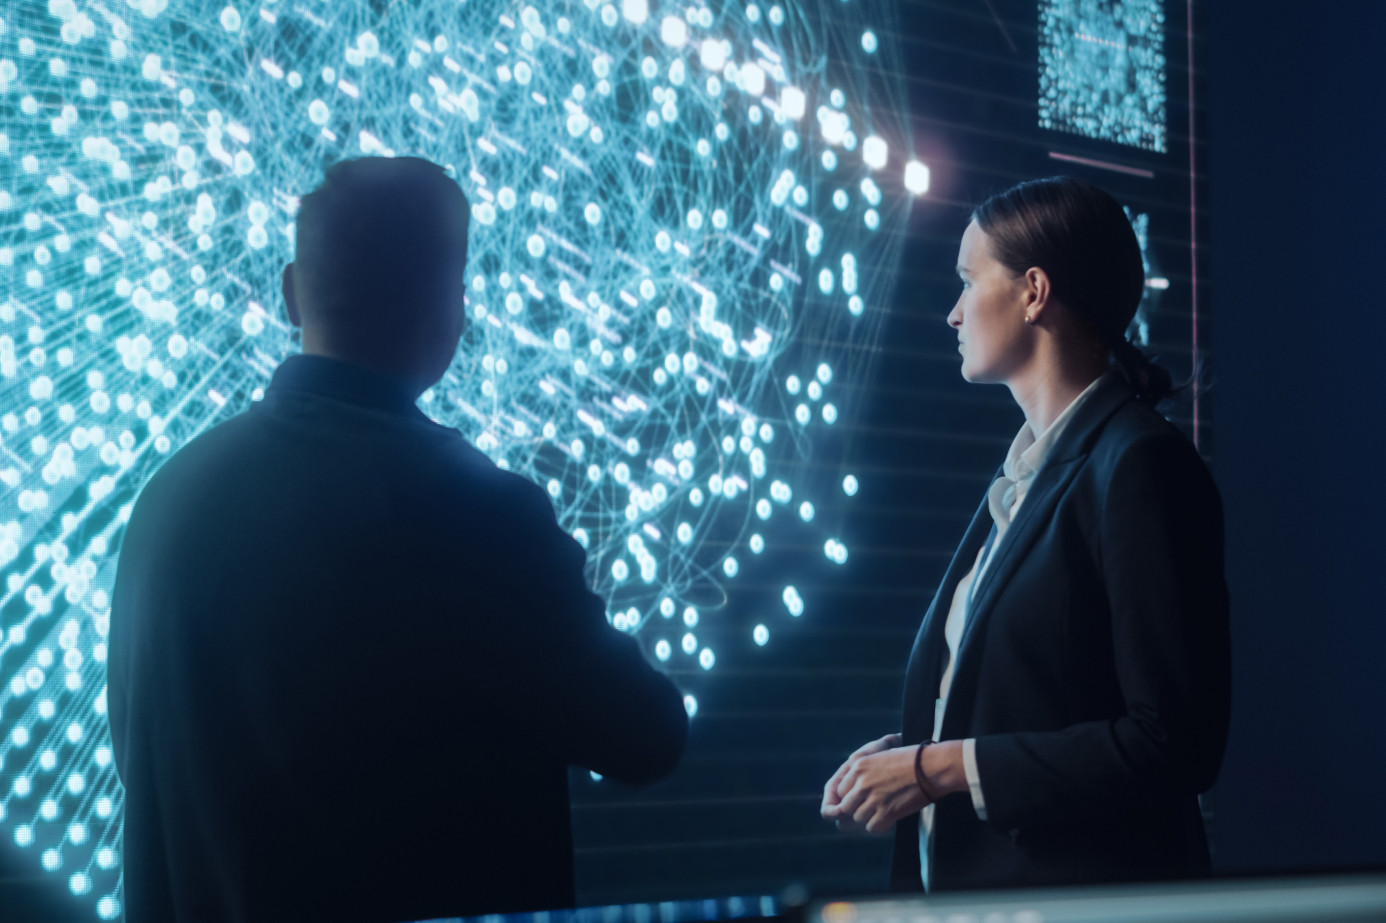 A man and a woman in suits looking at a futuristic visual